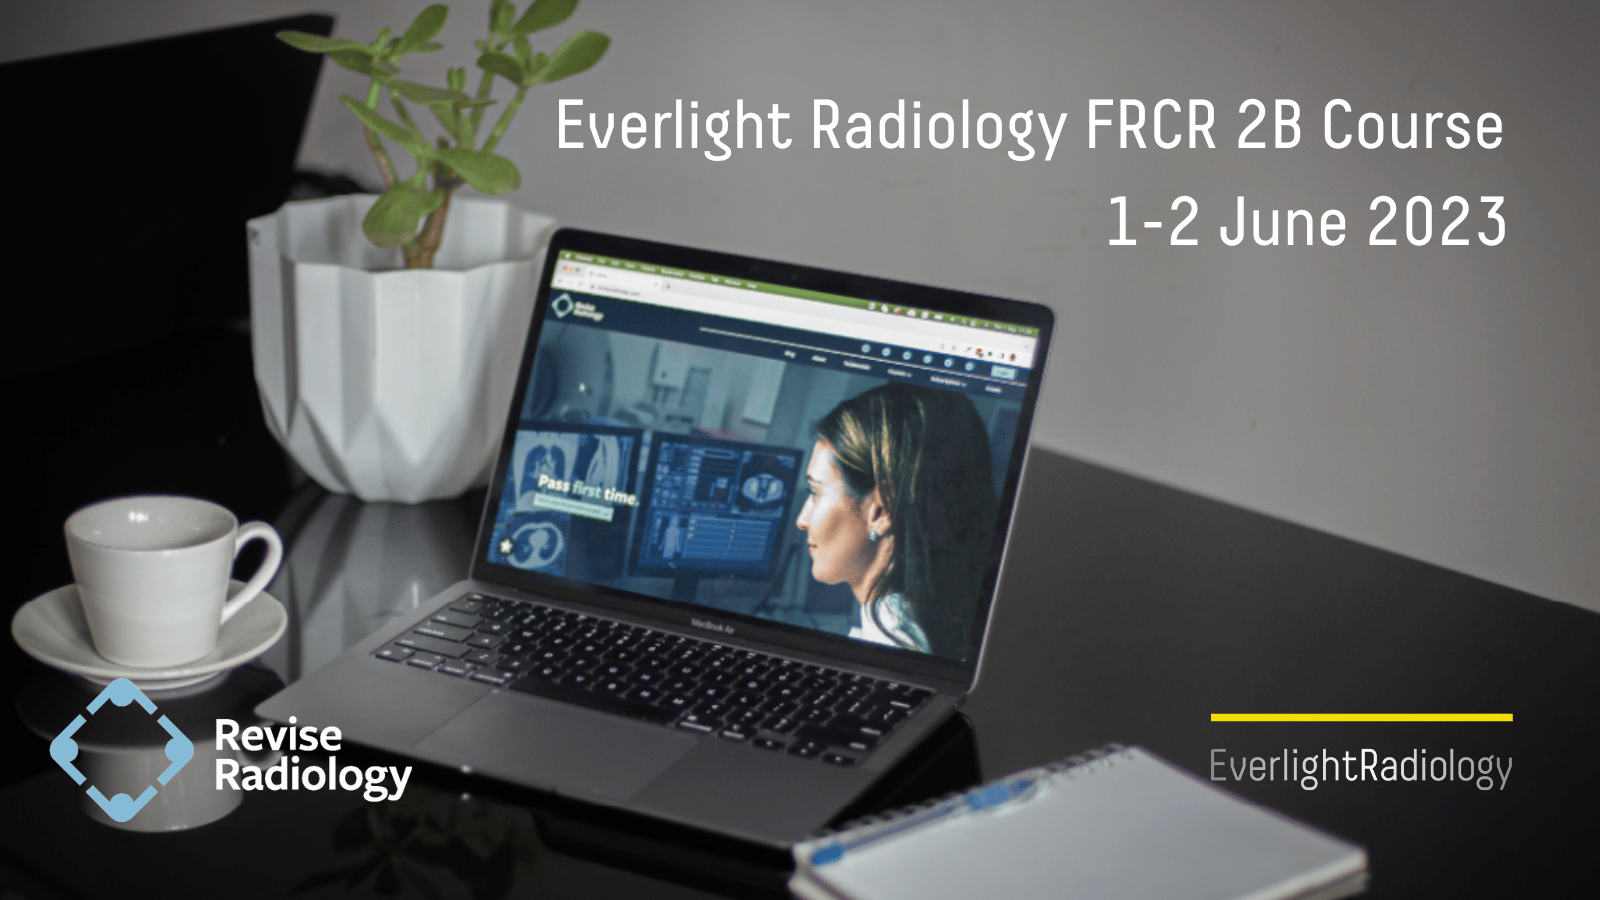 PAST EVENT: Everlight Radiology FRCR 2B Course